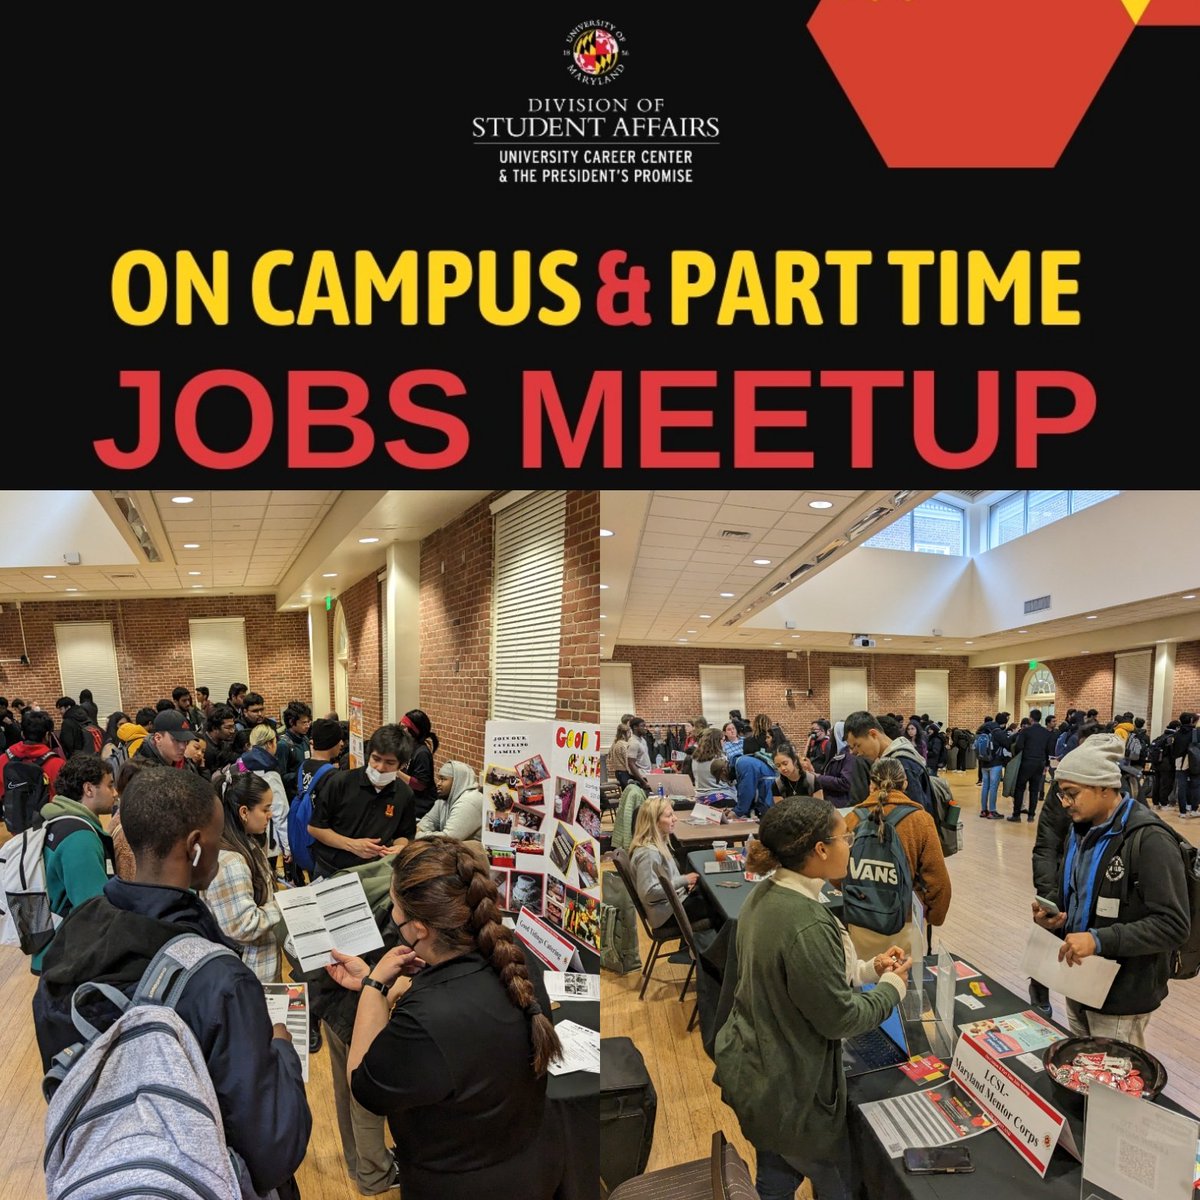 Thanks you #Terps 🐢 for joining us at the 2023 campus & part-time jobs meet-up! We'll see you at the next fair! 😉✌️ #HireTerps #GoTerps #fearlesslyforward #FearlesslyUMD #UMD